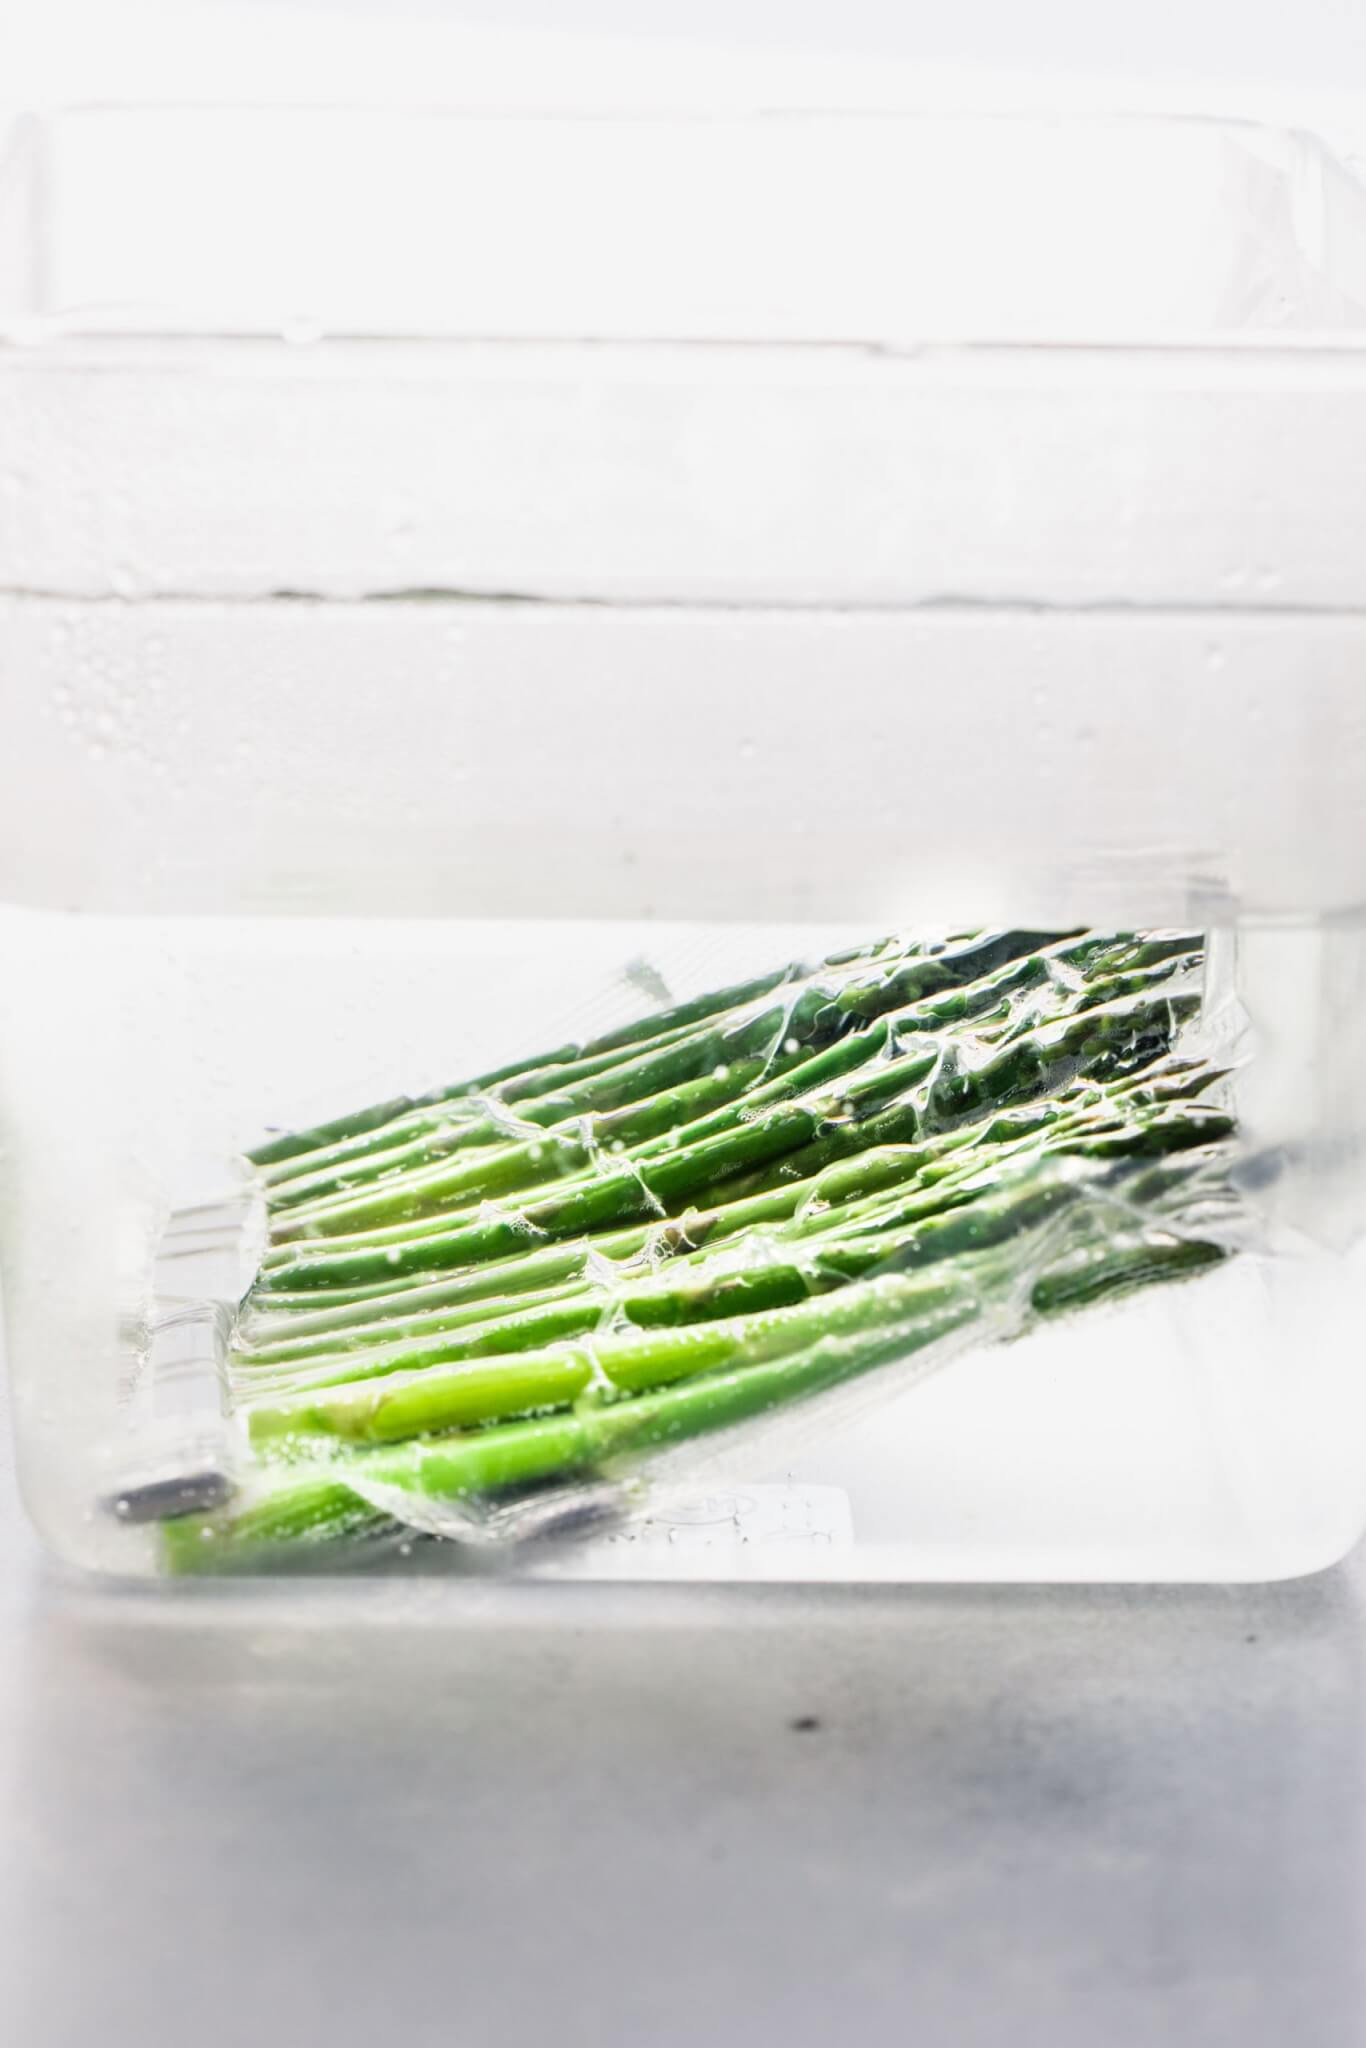 Asparagus floating in sous vide water bath